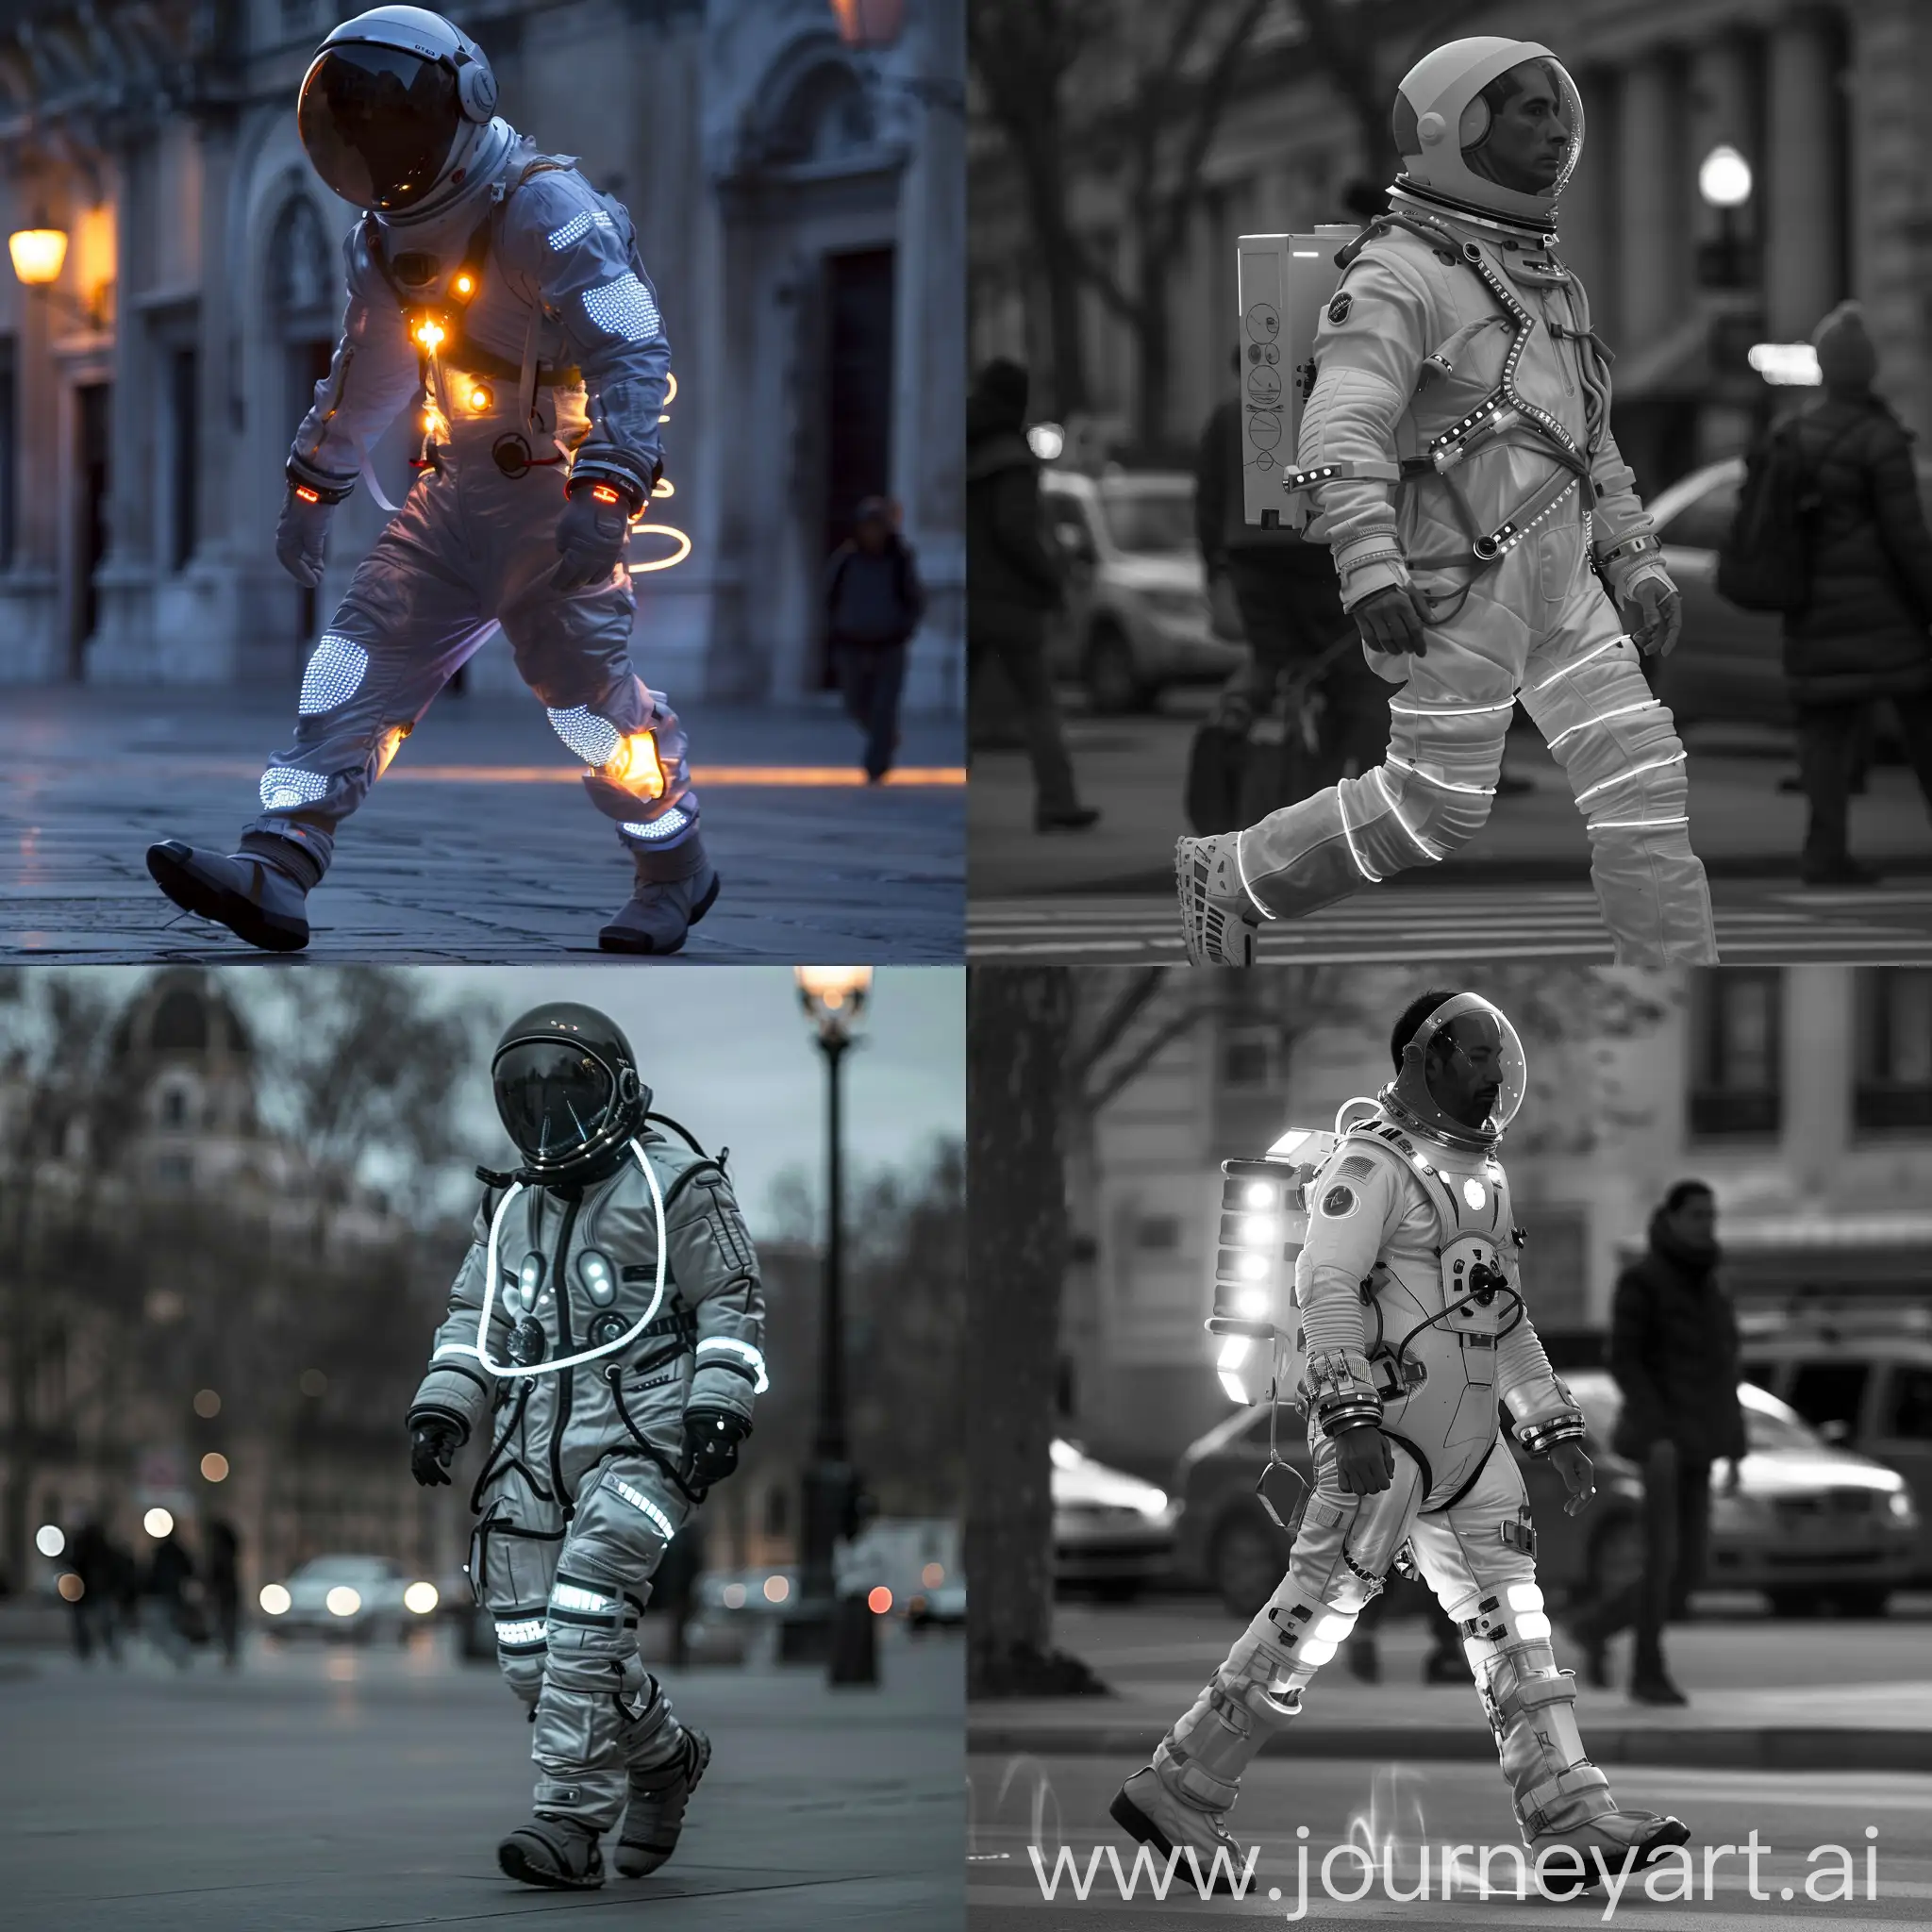 Man-in-Spacesuit-Walking-on-Street-with-LED-Diodes-and-Spaceship-Sounds